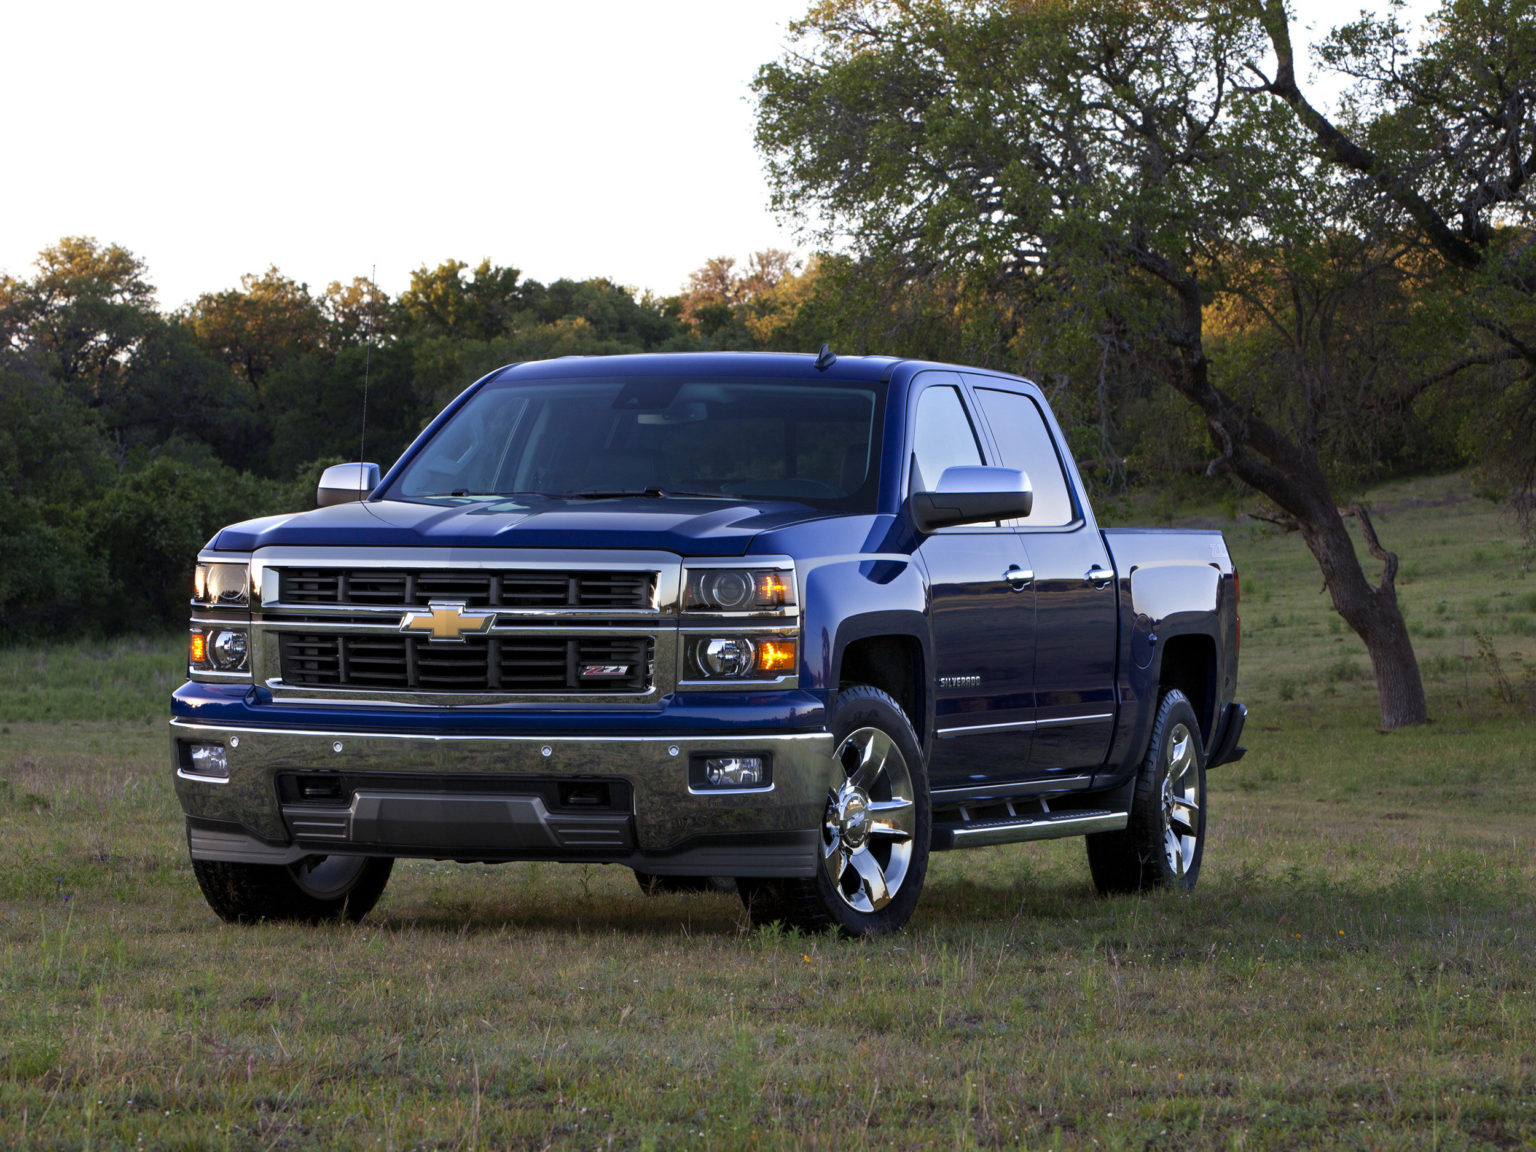 The Chevrolet Silverado is one of the most dependable pickup trucks you can buy.